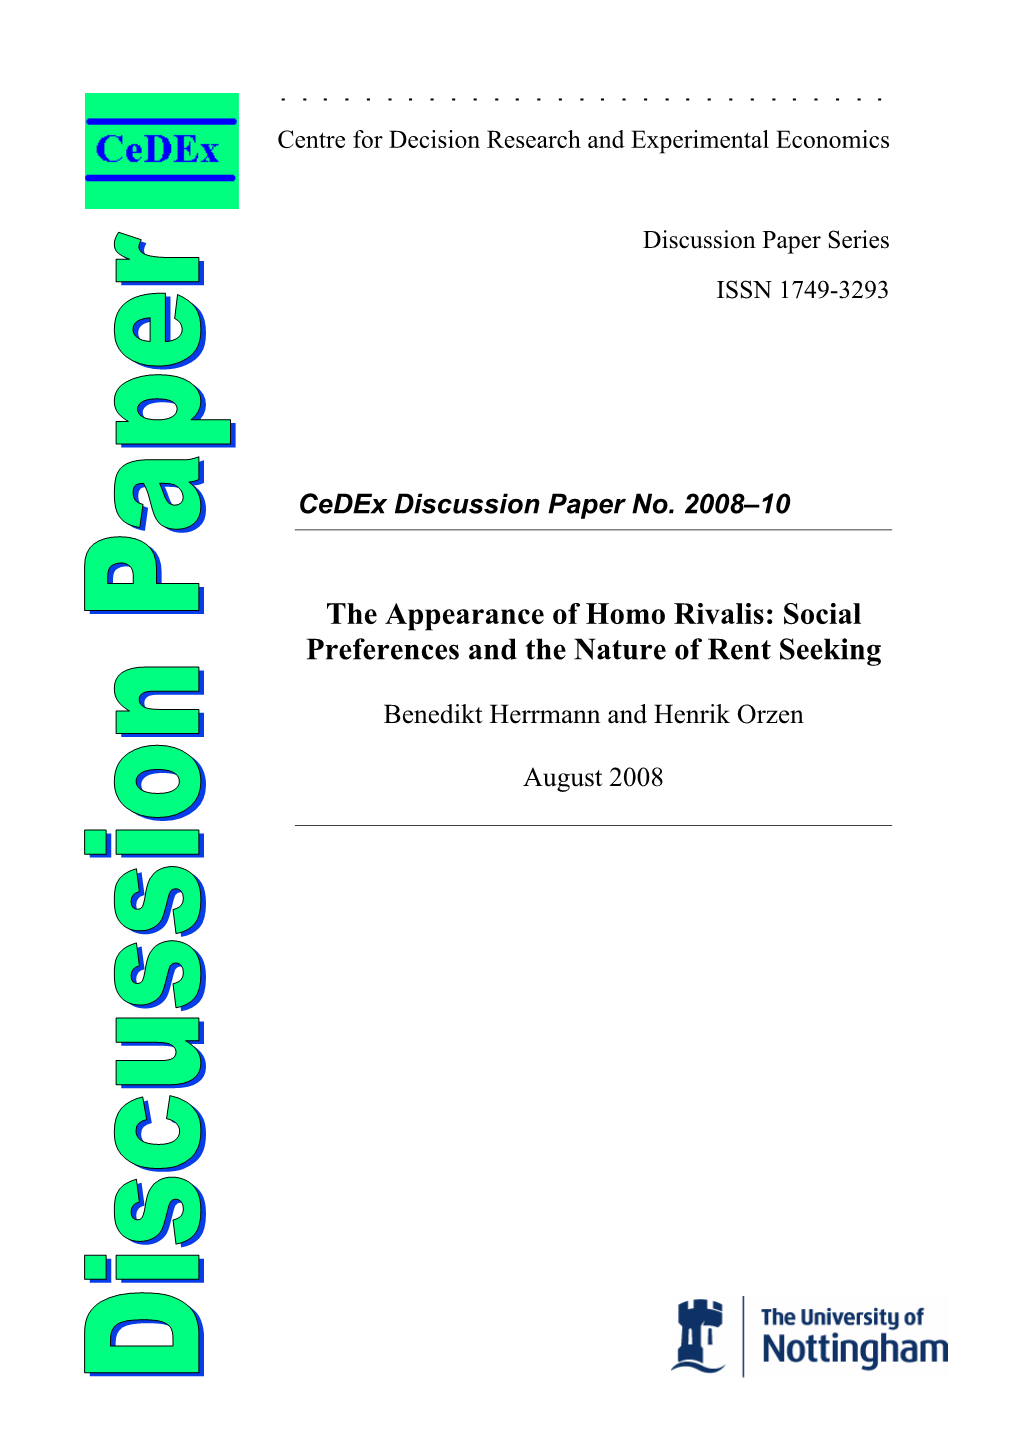 The Appearance of Homo Rivalis: Social Preferences and the Nature of Rent Seeking